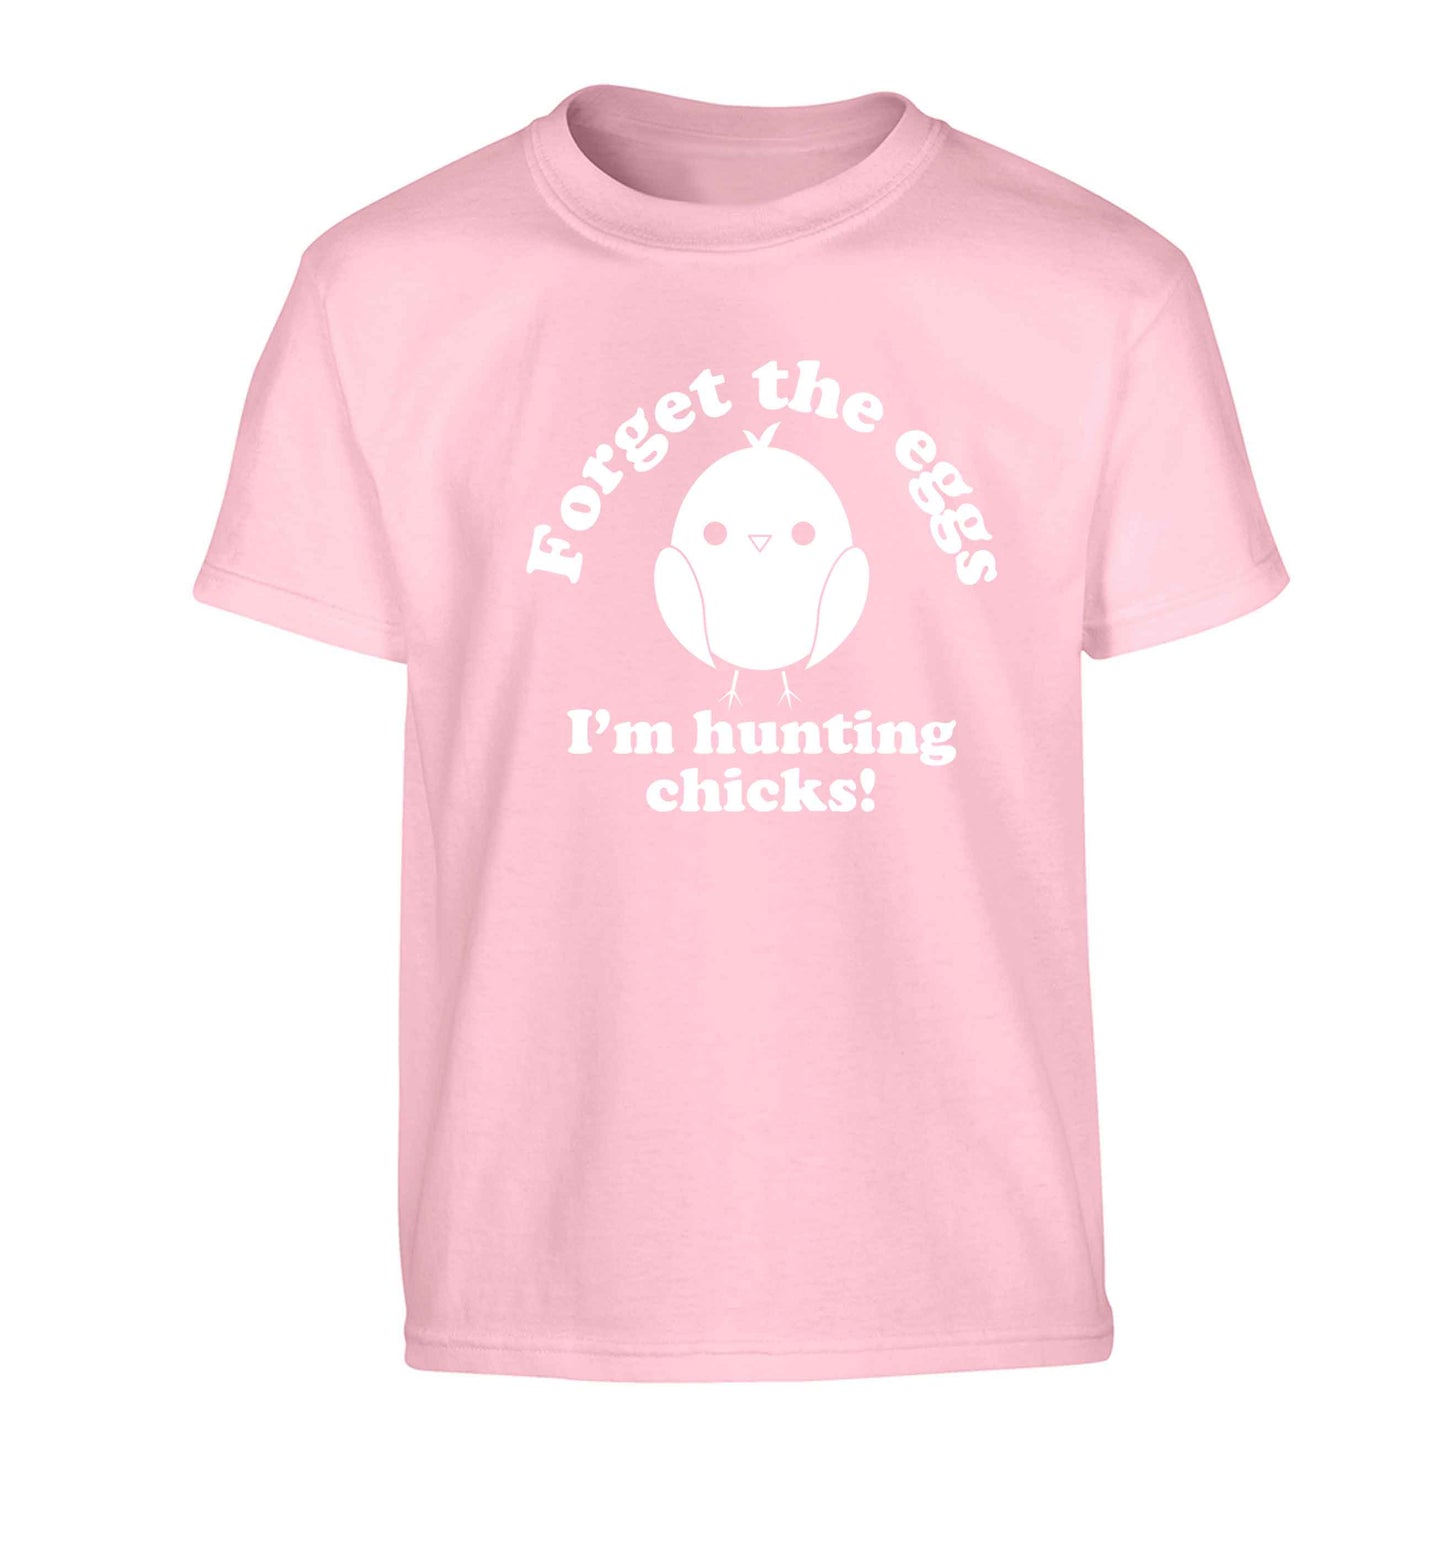 Forget the eggs I'm hunting chicks! Children's light pink Tshirt 12-13 Years